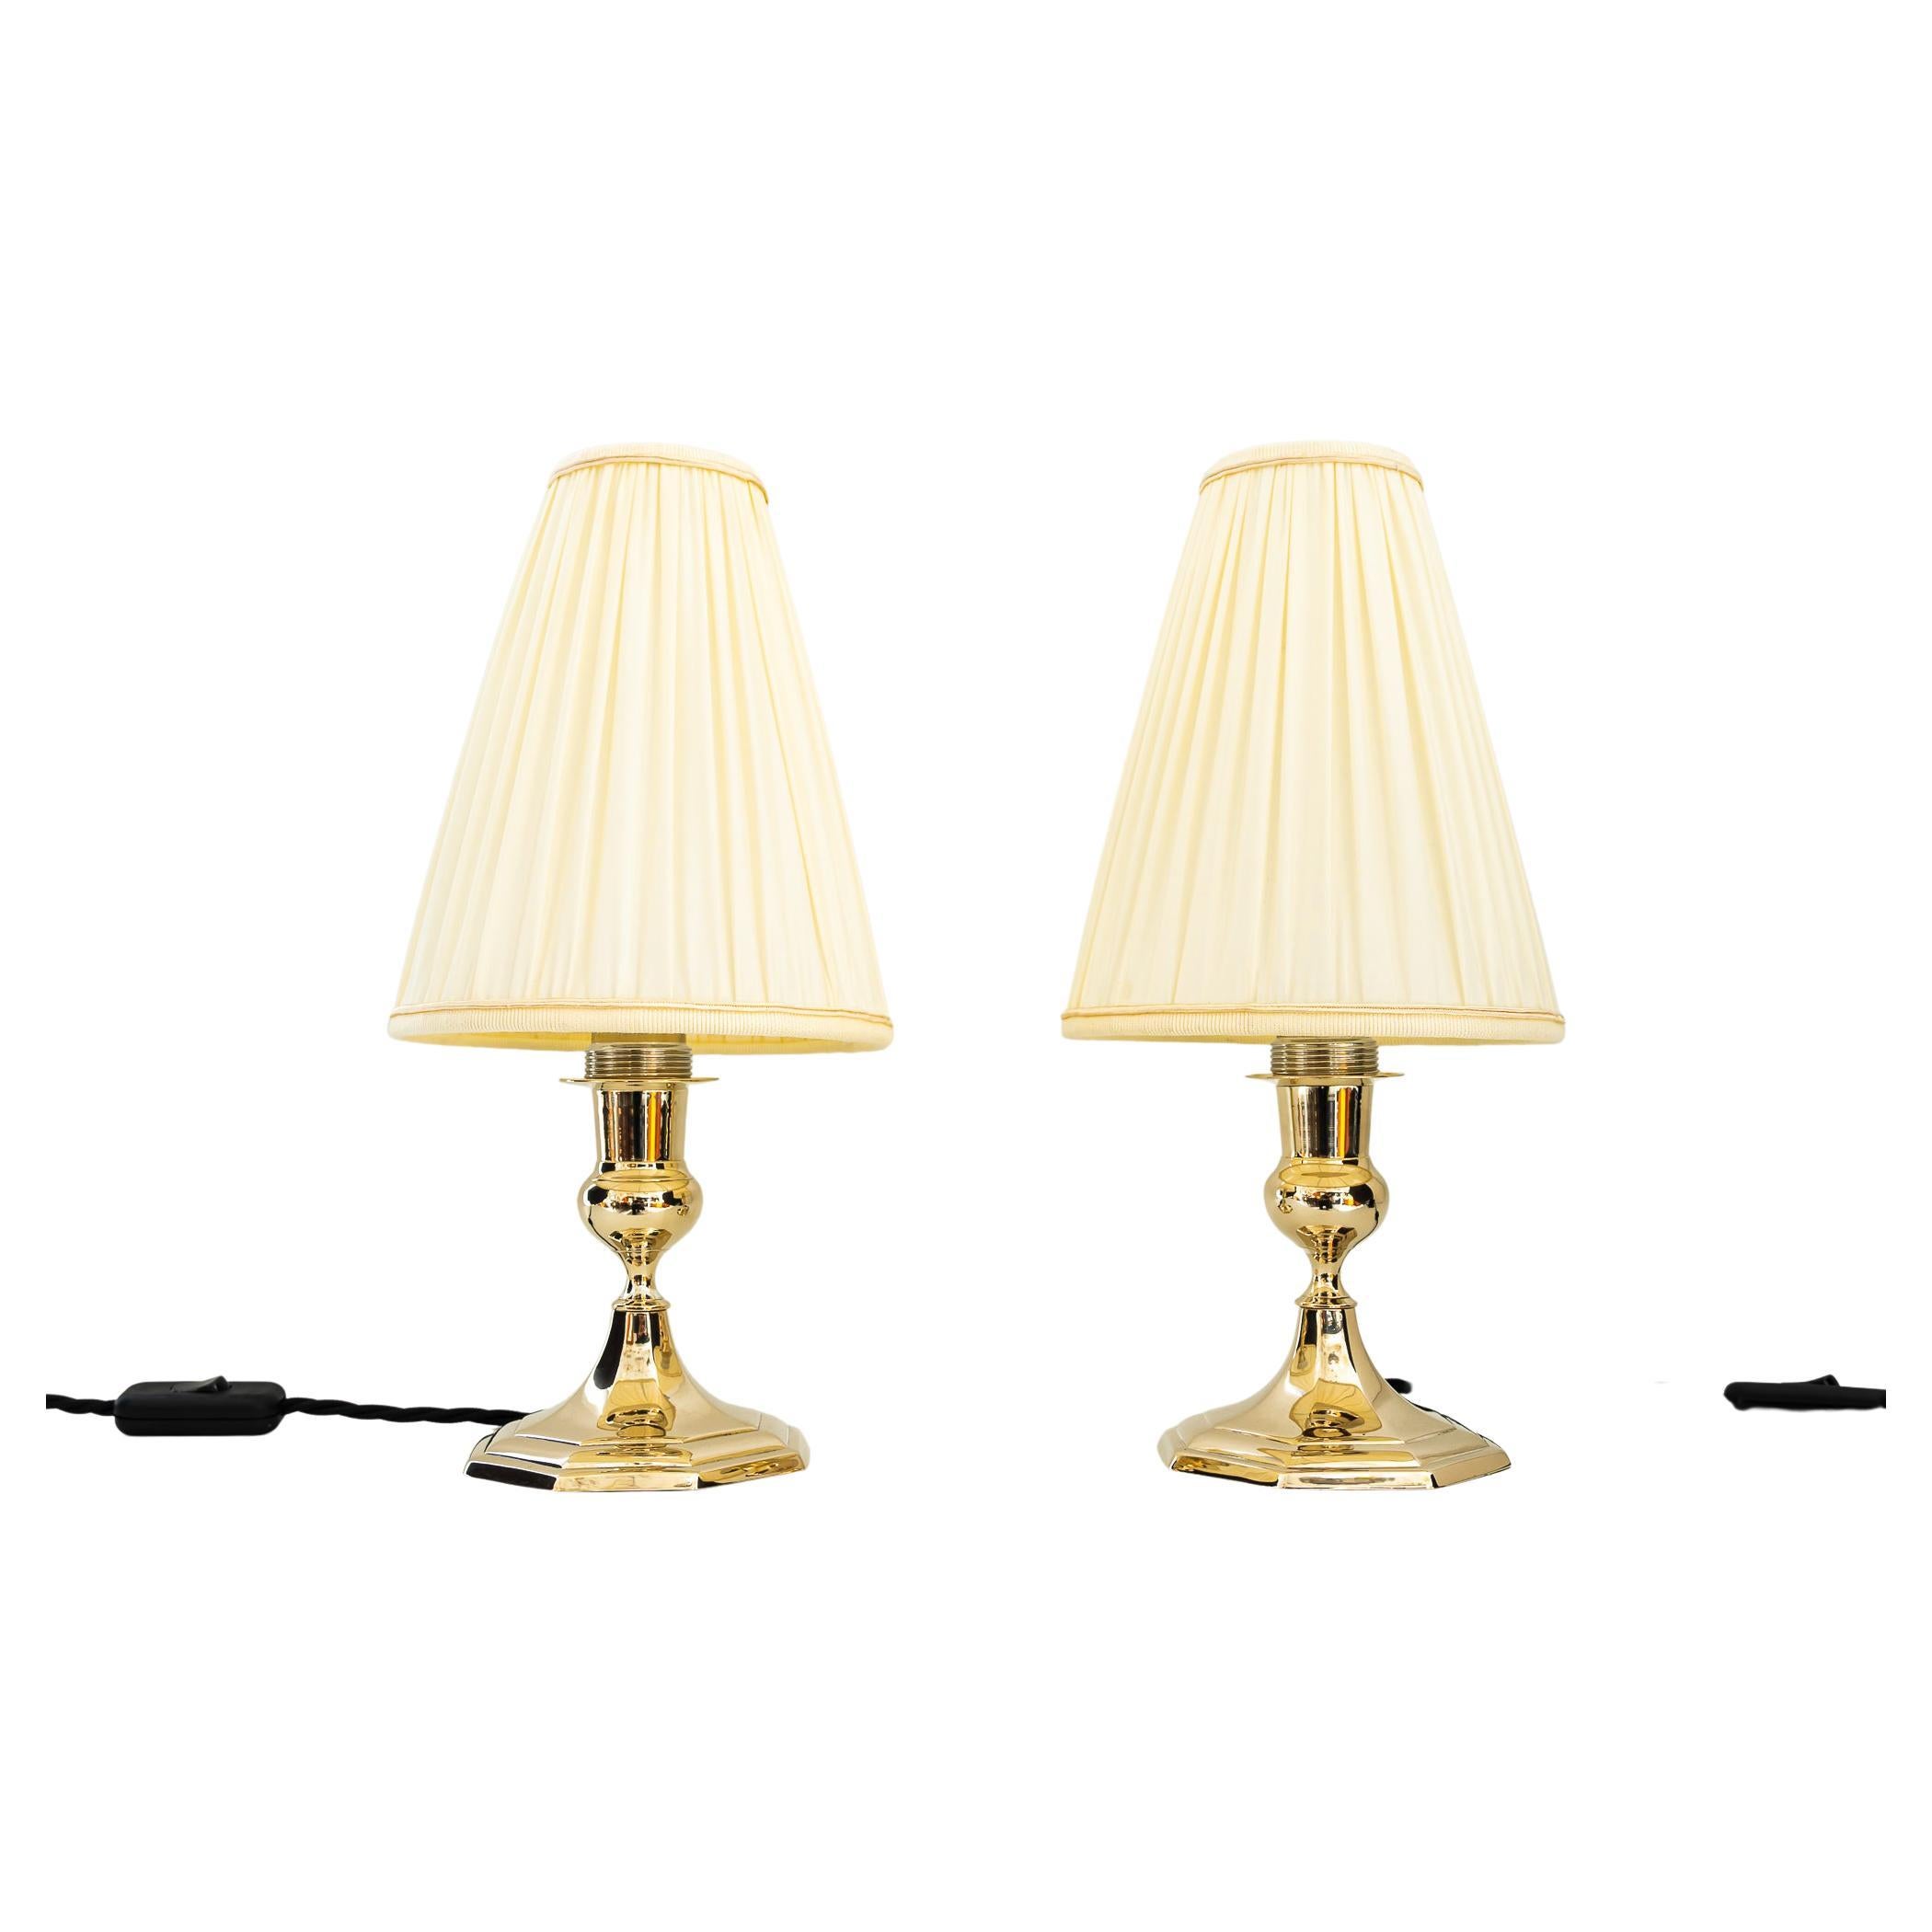 2 Art Deco Table Lamps with Fabric Shades, Vienna, Around 1920s  For Sale